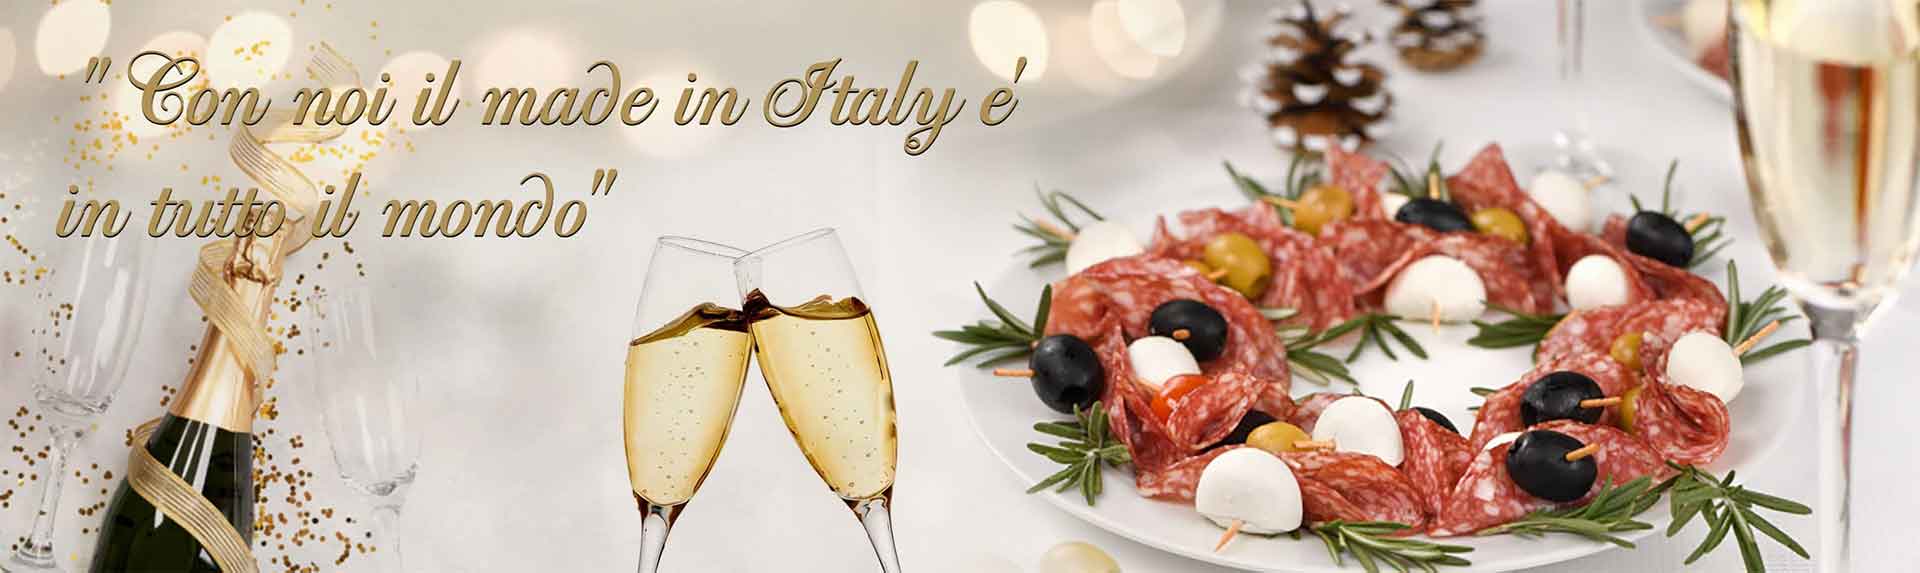 italian-food-products-online-shopping